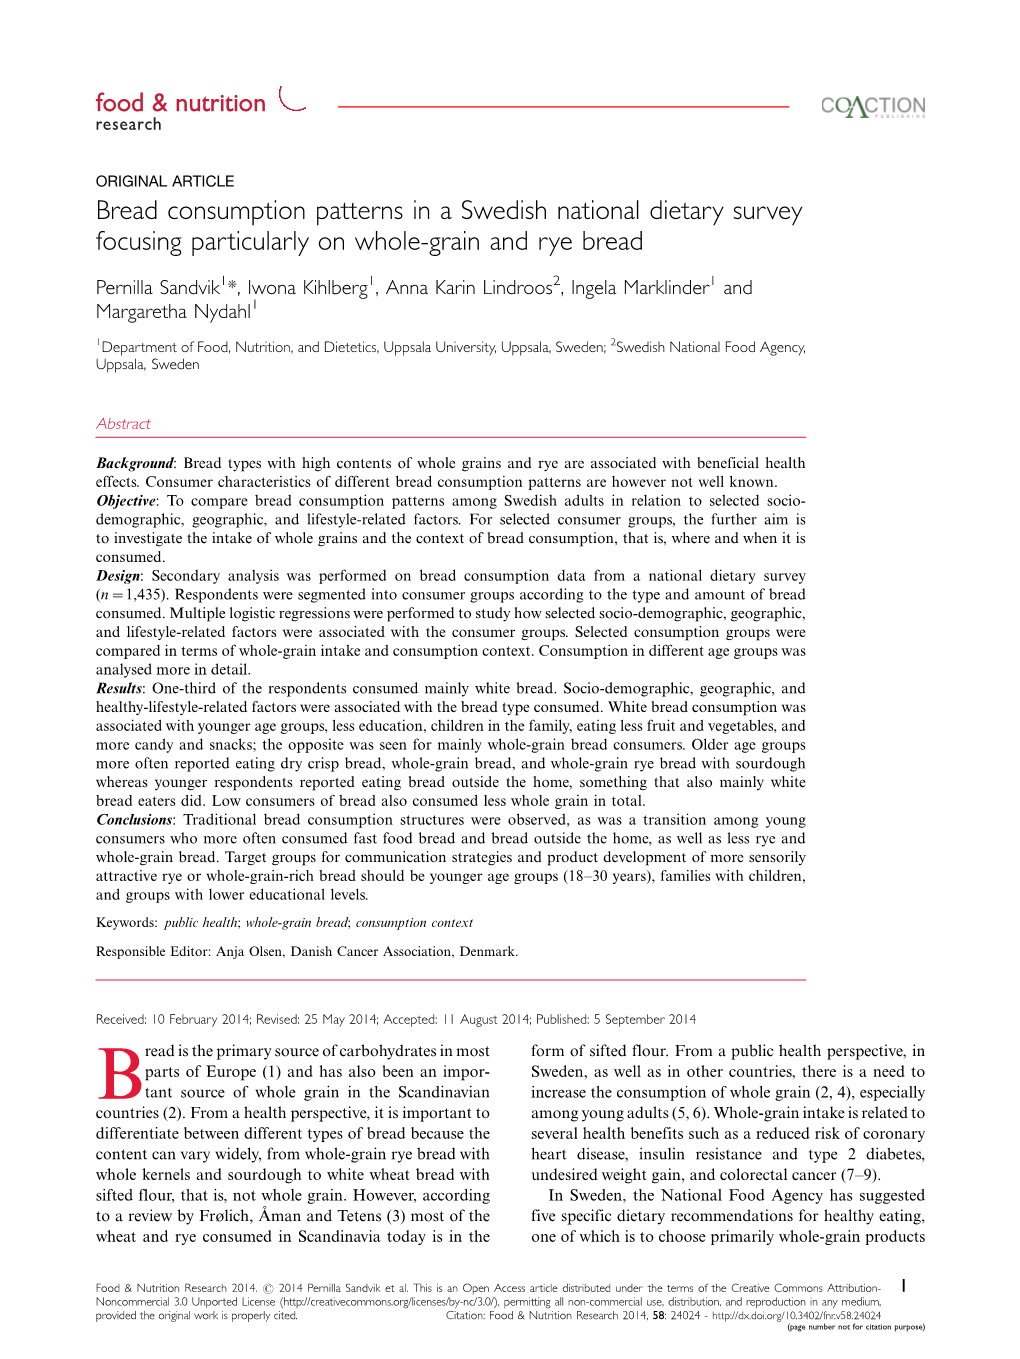 Bread Consumption Patterns in a Swedish National Dietary Survey Focusing Particularly on Whole-Grain and Rye Bread